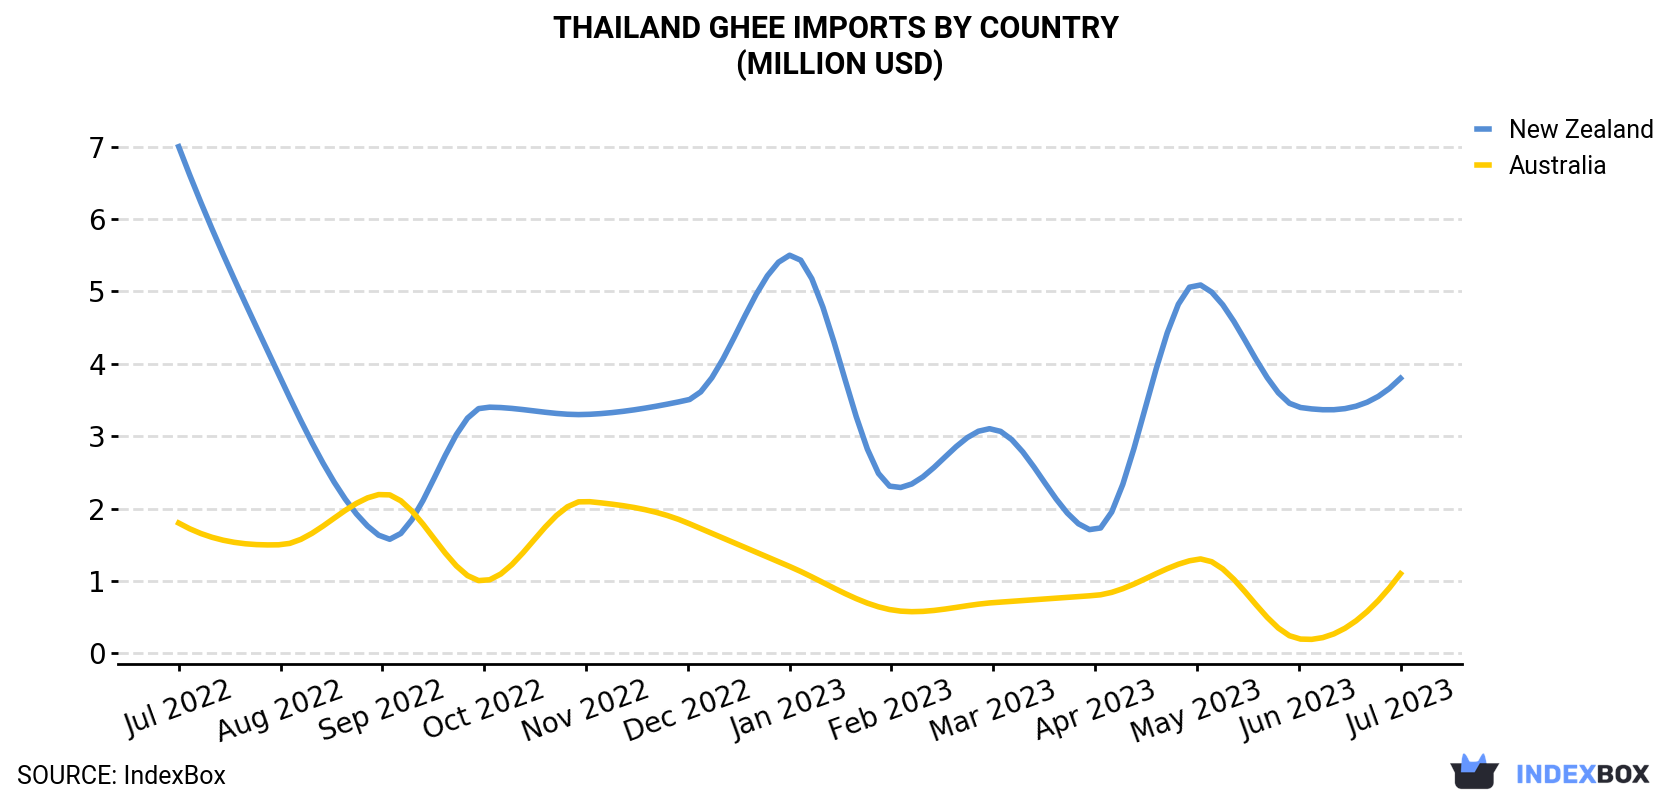 Thailand Ghee Imports By Country (Million USD)